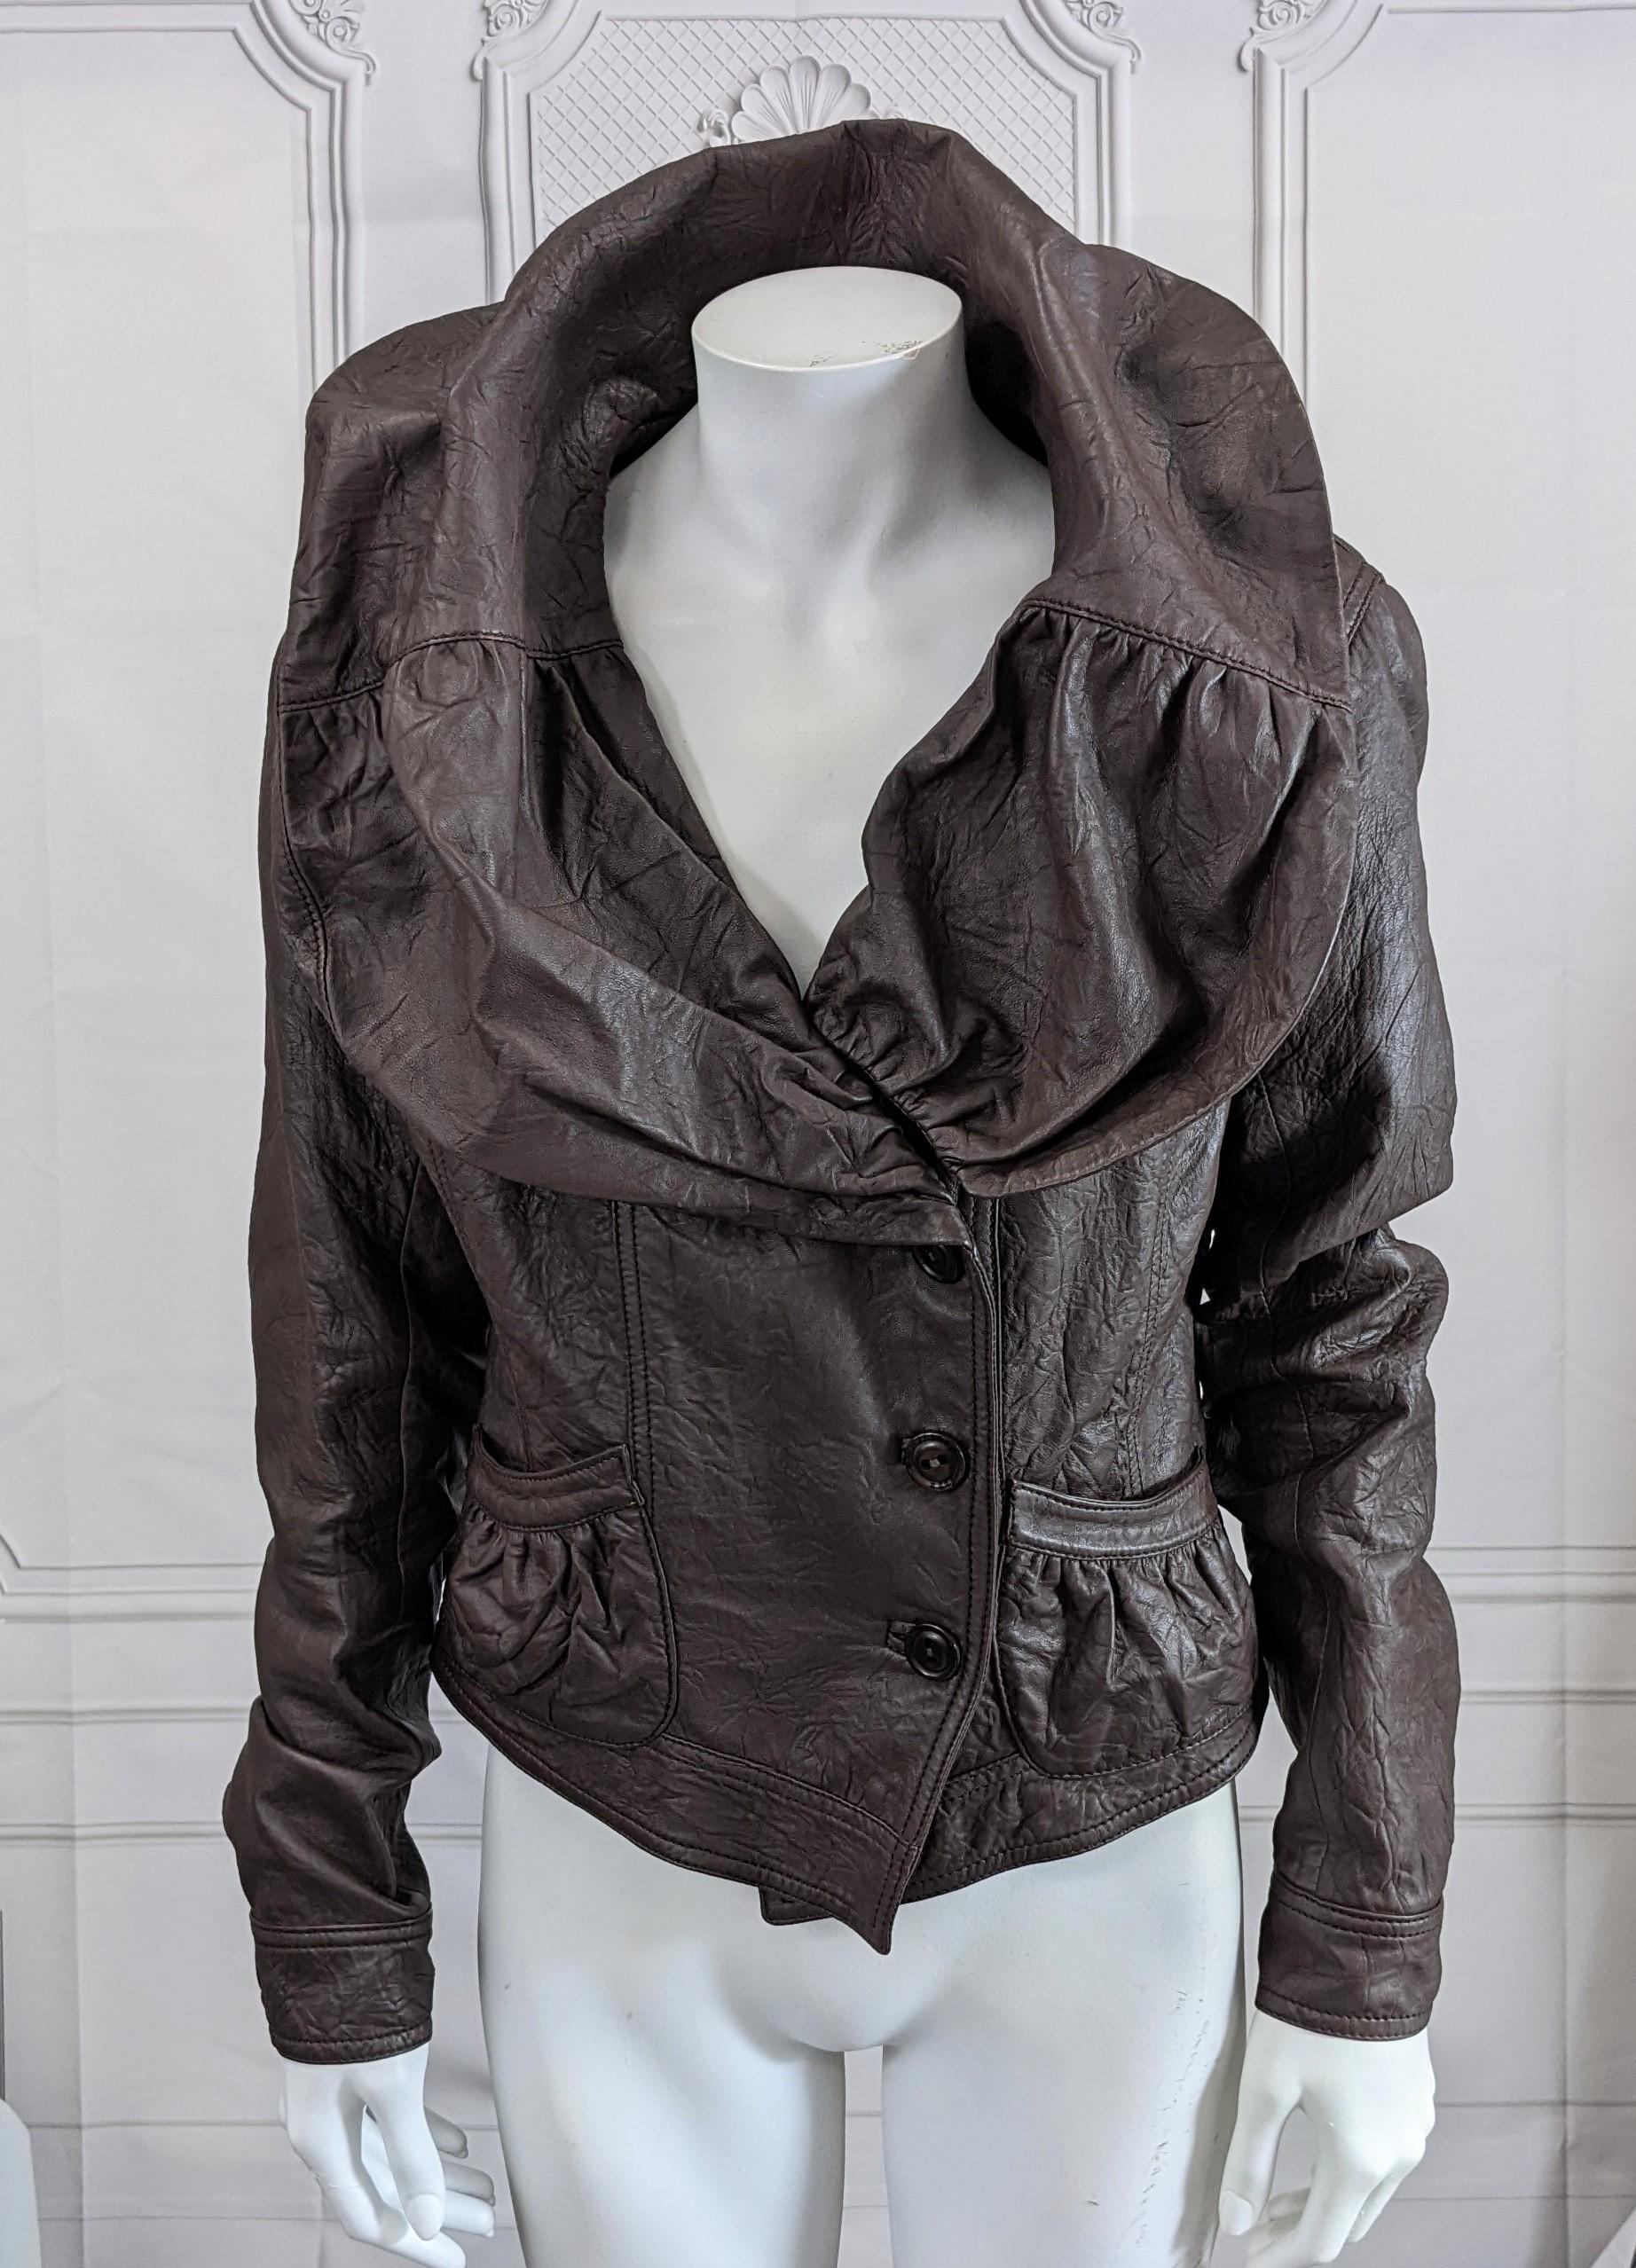 John Galliano Fall/Winter 2005 portrait collar cropped leather jacket of distressed and gently wrinkled sheeps skin coffee brown leather. Dramatic draped portrait collar that came be laid flat or pulled open, closing with side button closures.